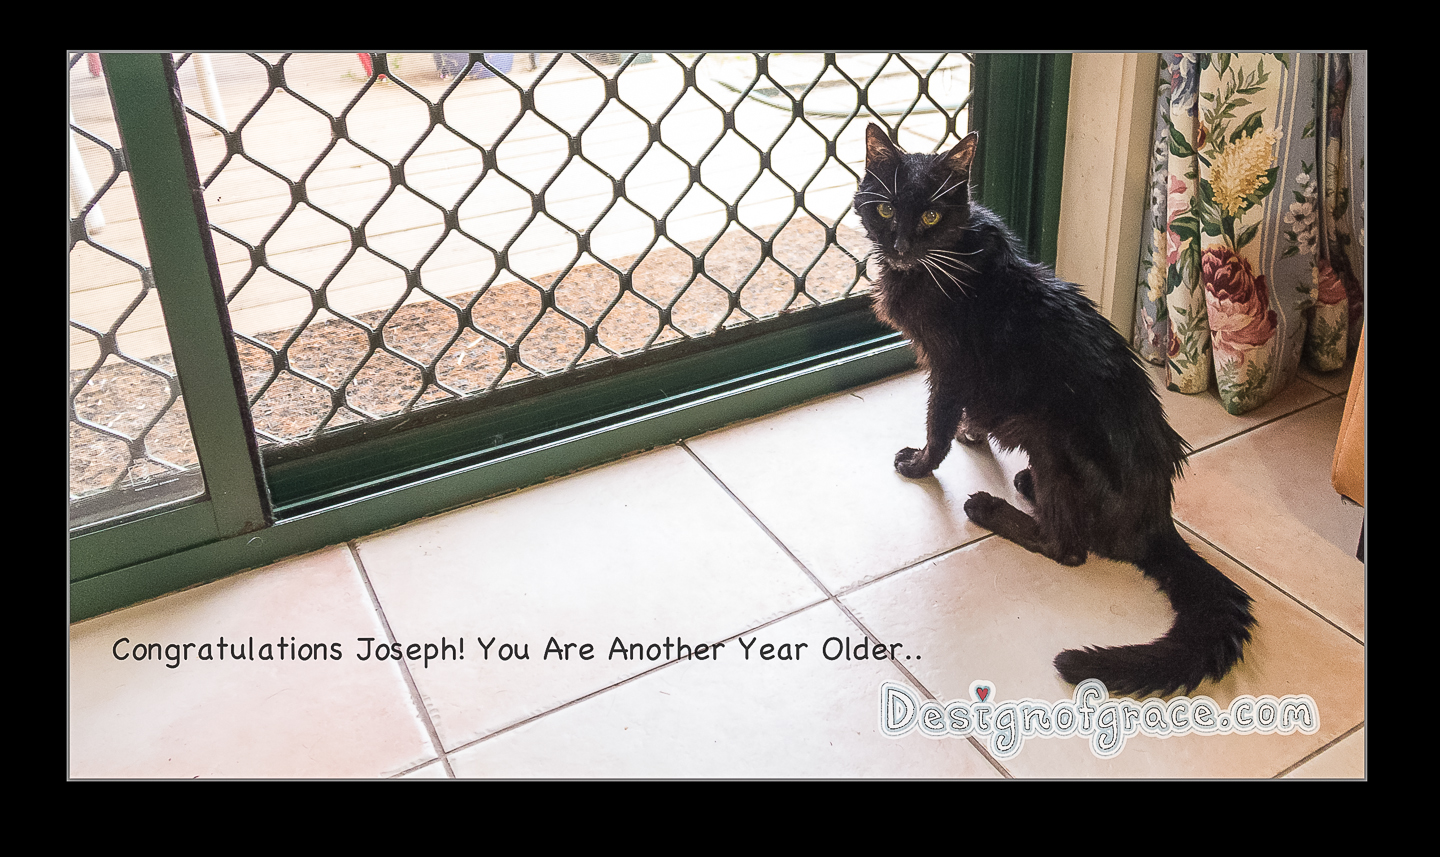 Old black cat with white whiskers saying " Congratulations Joseph! You Are Another Year Older"